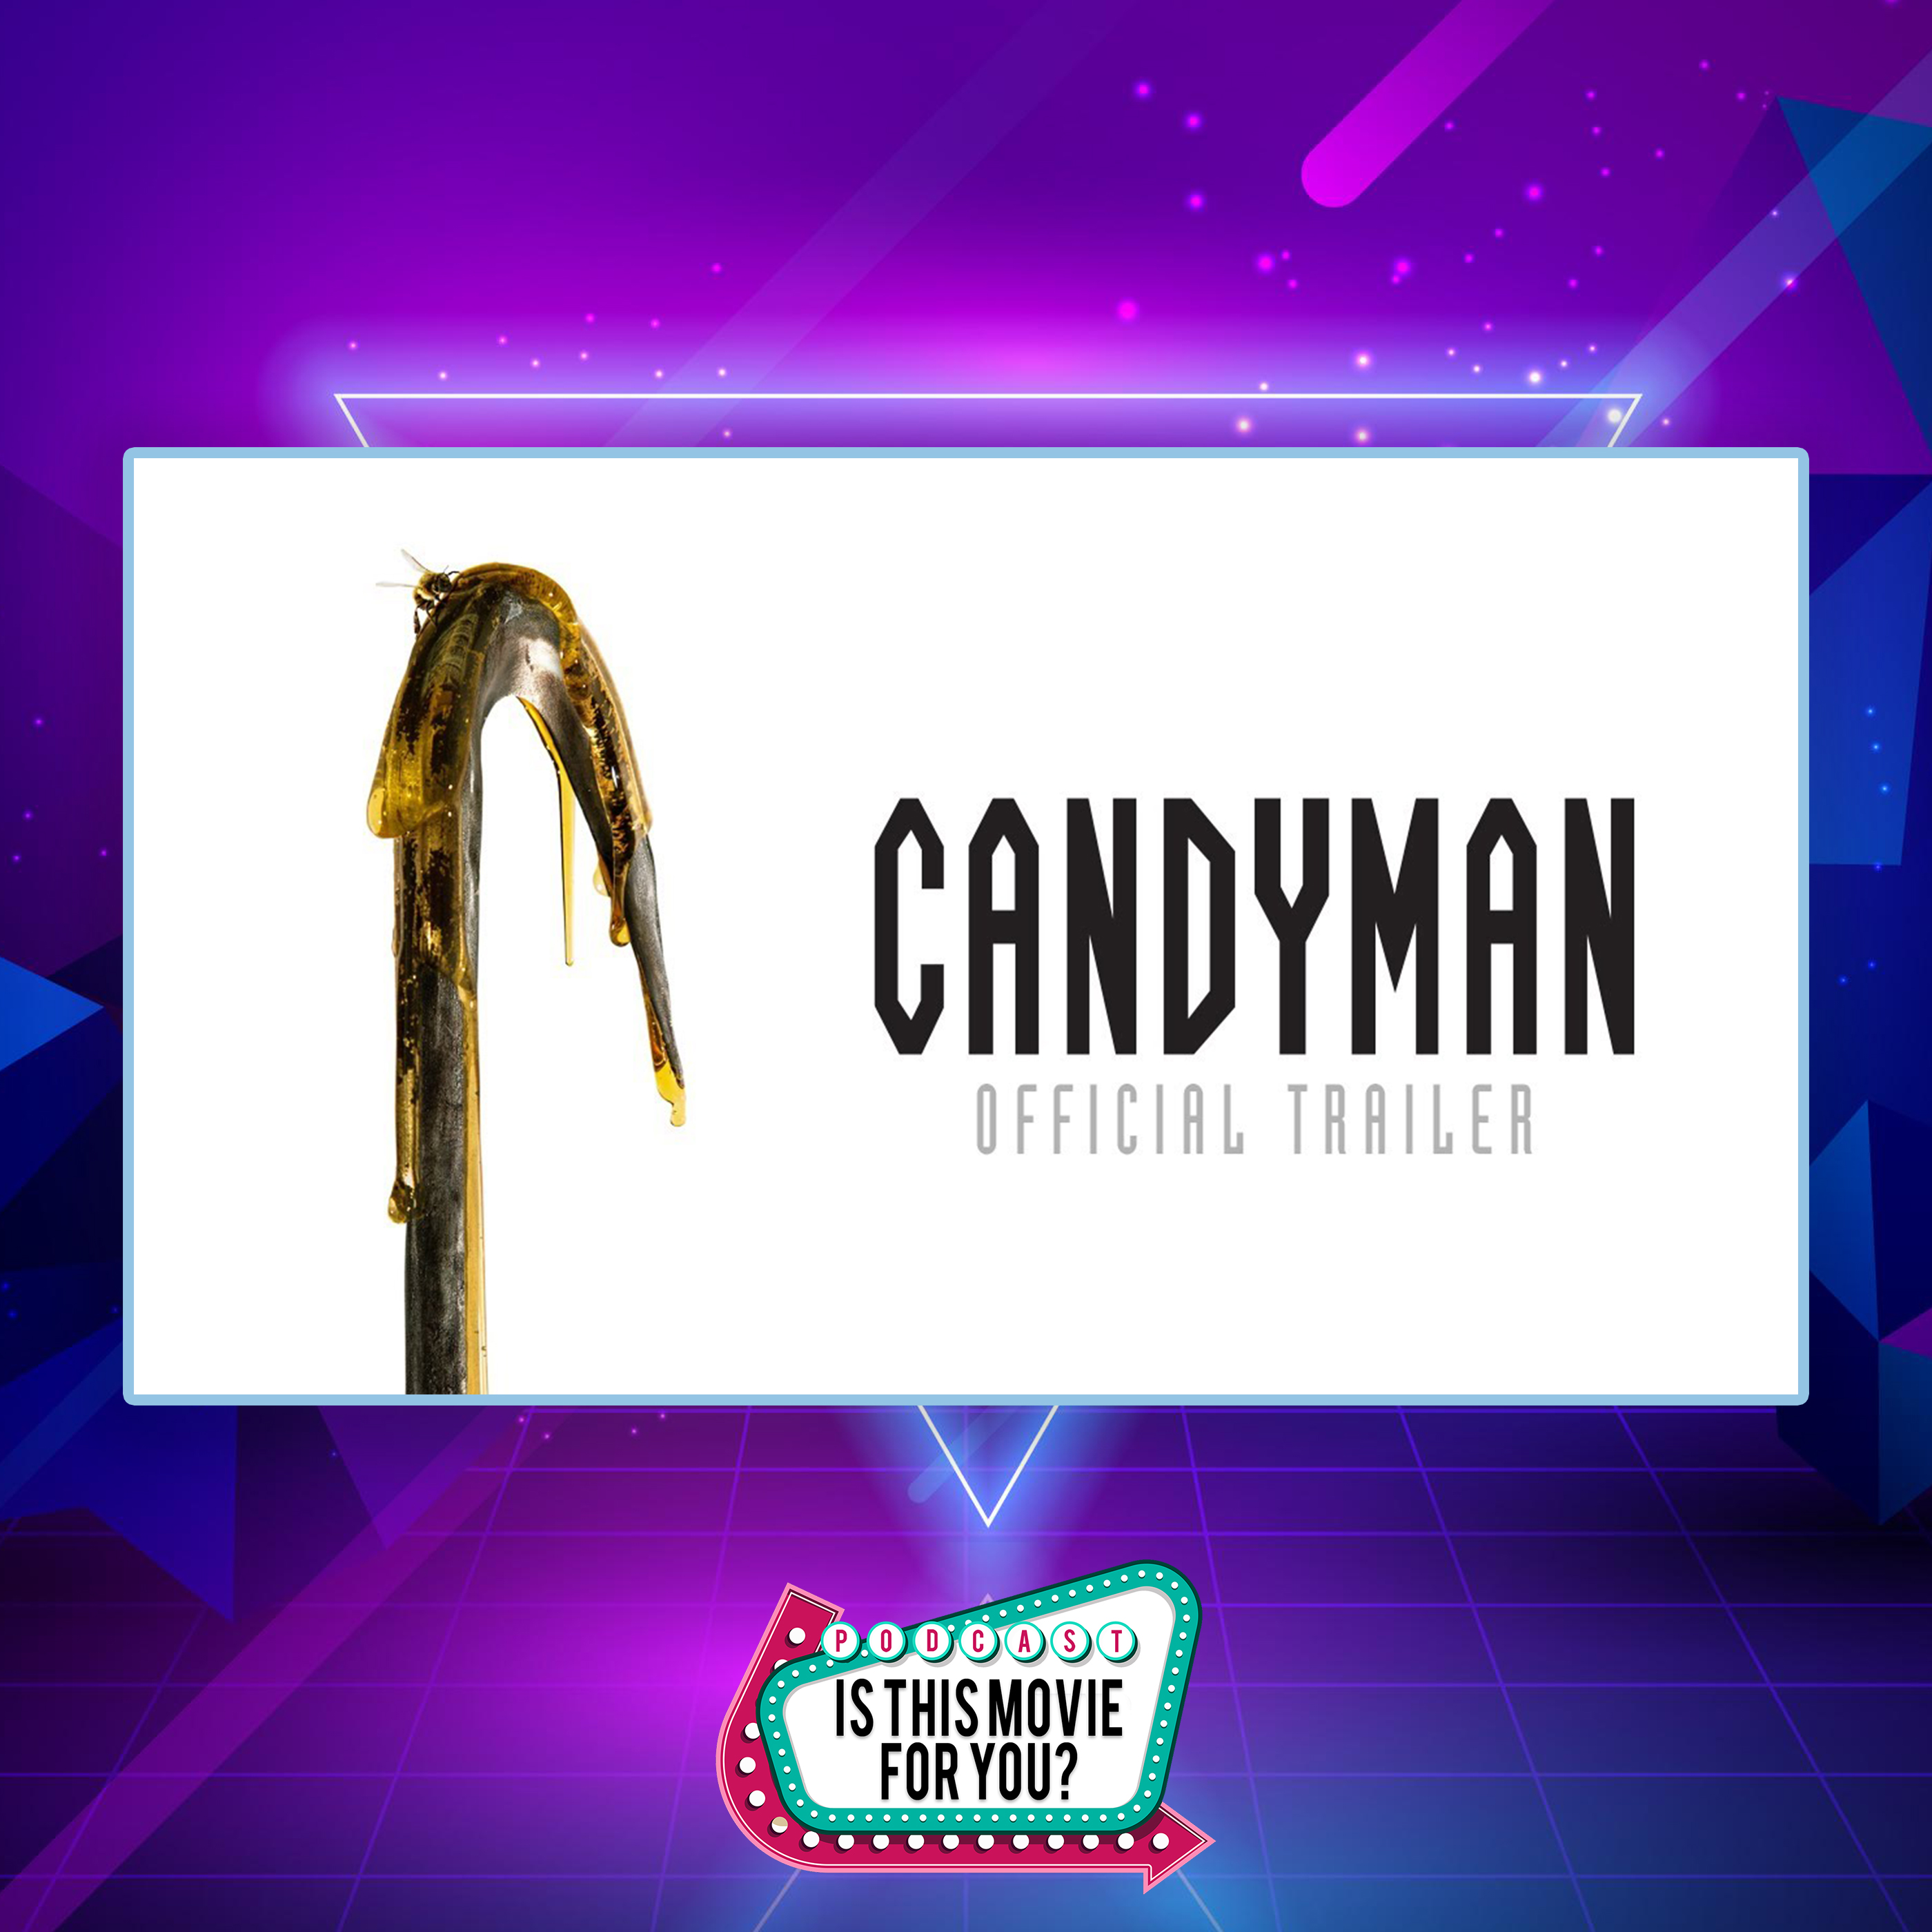 Is 'Candyman' the movie trailer for you?